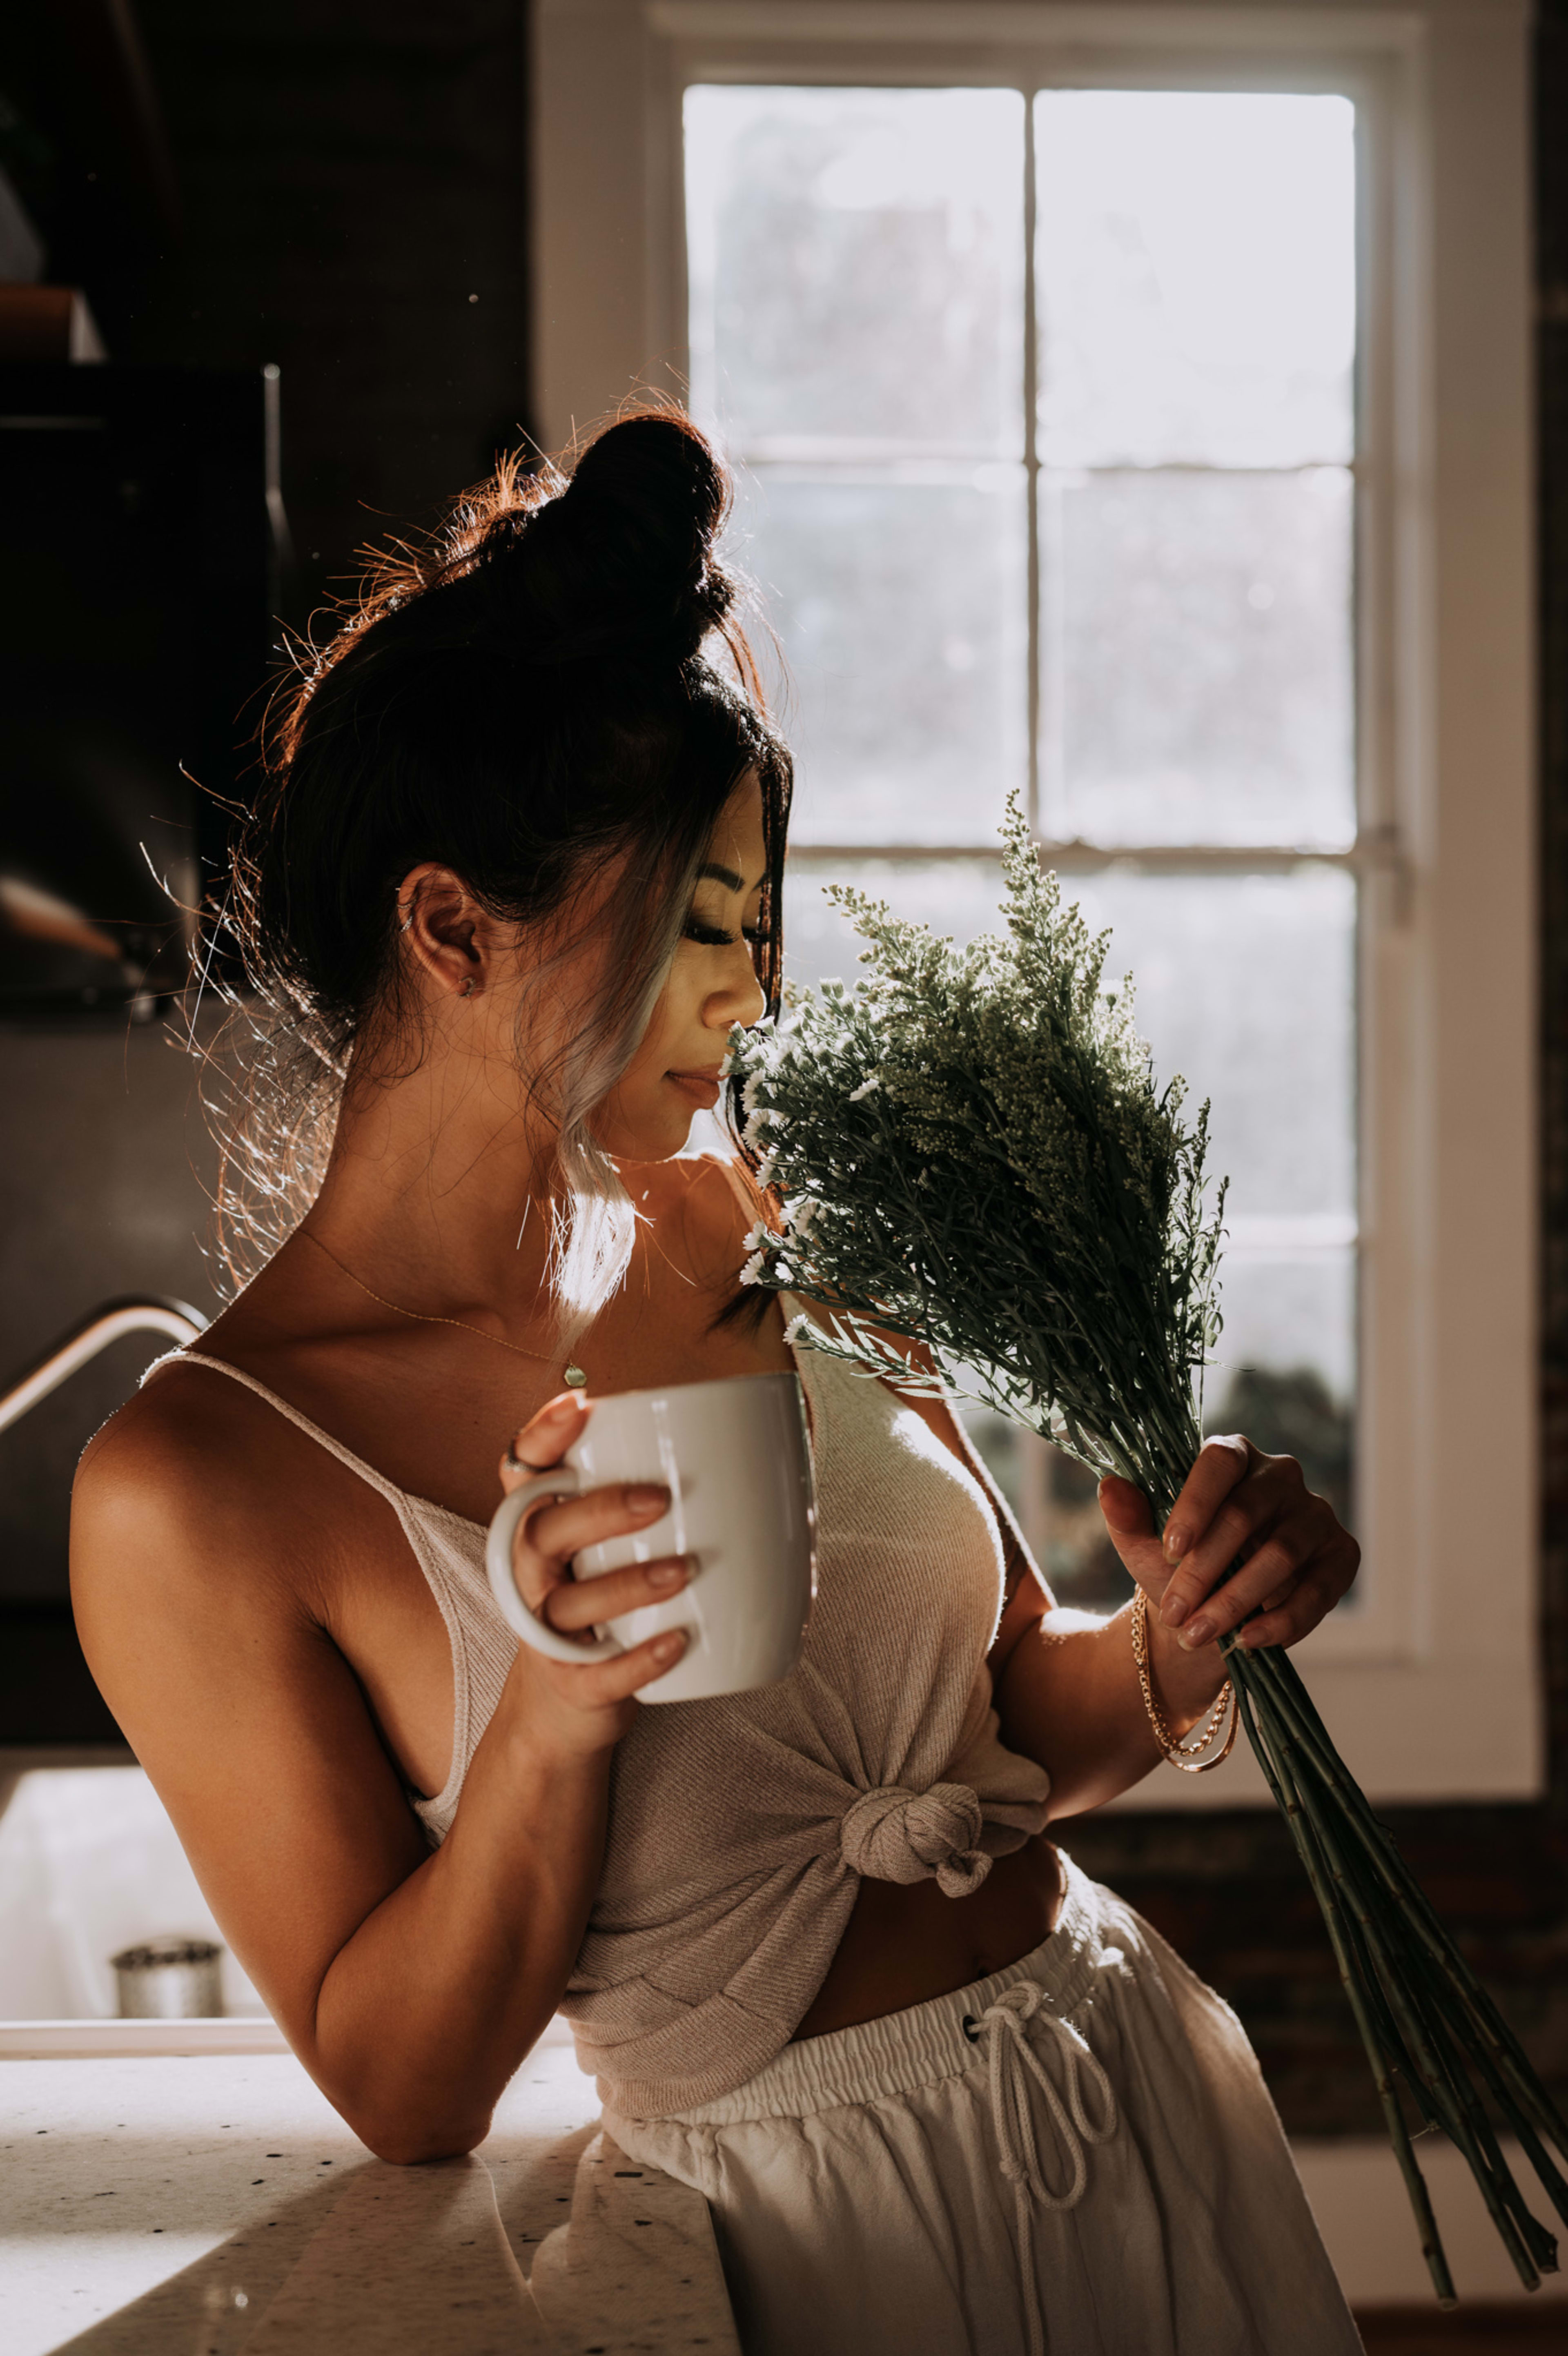 A photoshoot featuring a woman holding a cup of coffee and flowers.